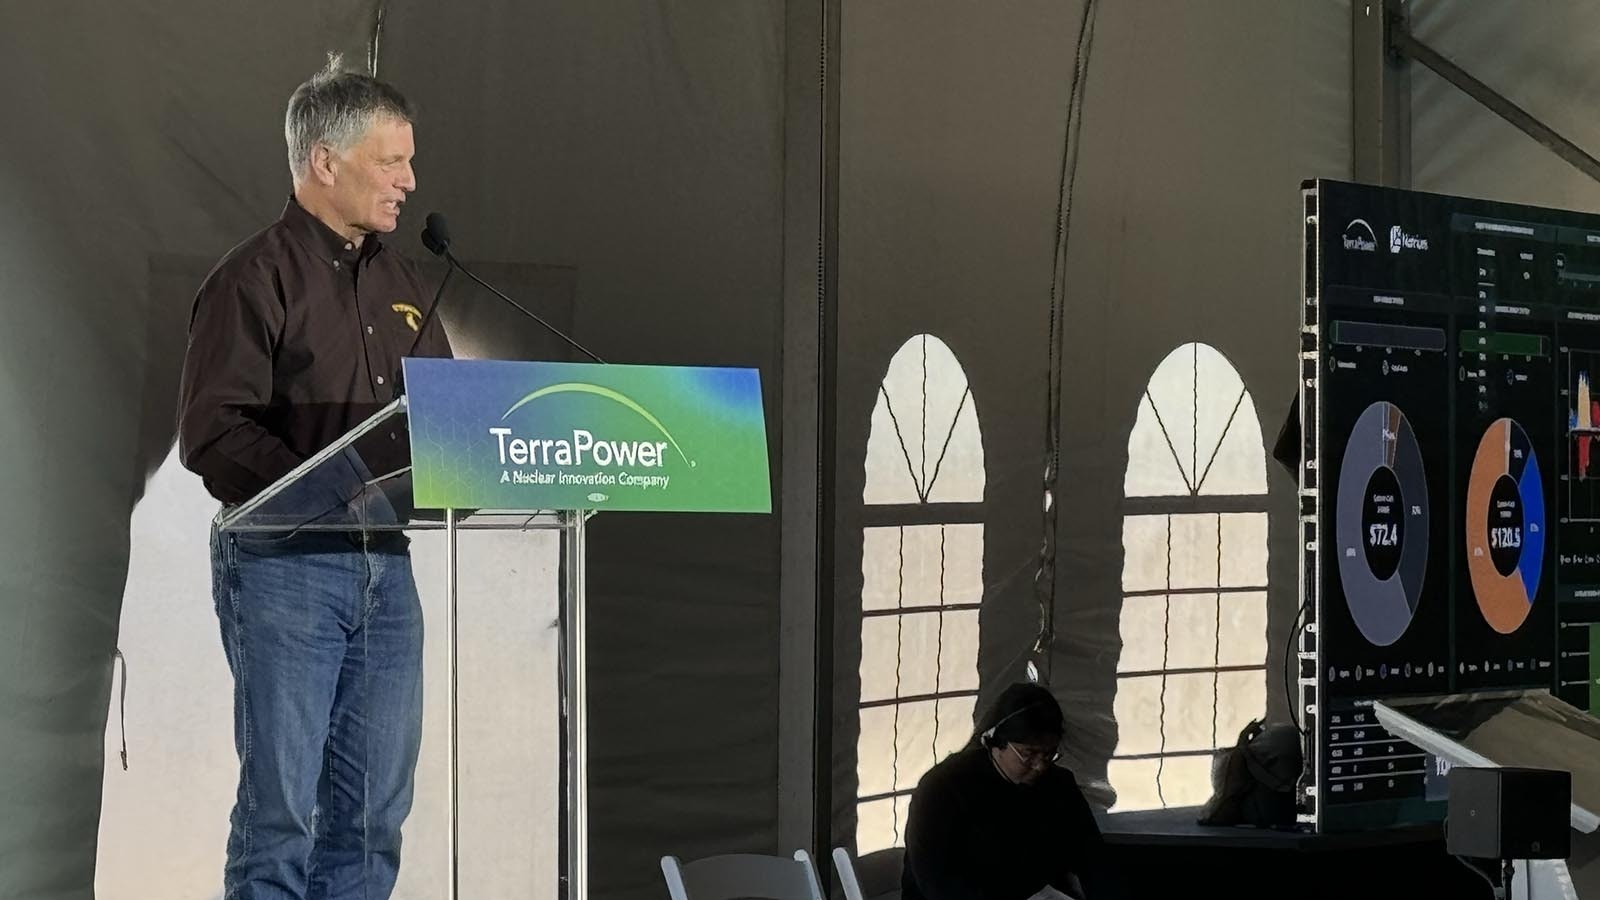 Wyoming Gov. Mark Gordon told a crown of 300 people who attended the groundbreaking ceremony for TerraPower’s nuclear reactor being built in Kemmerer, Wyoming that the project “will make a difference.”